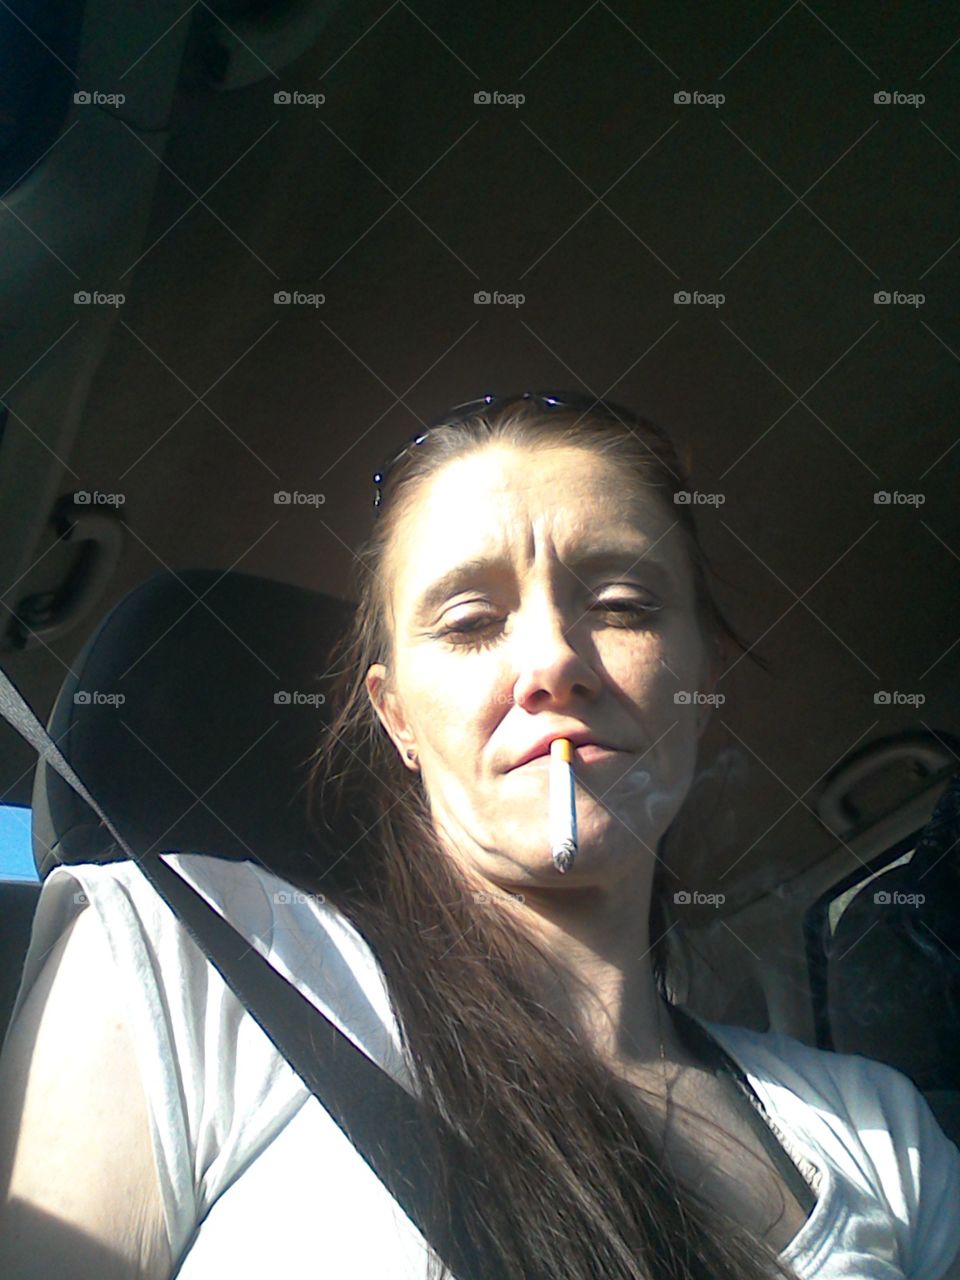 wife with cig in her mouth